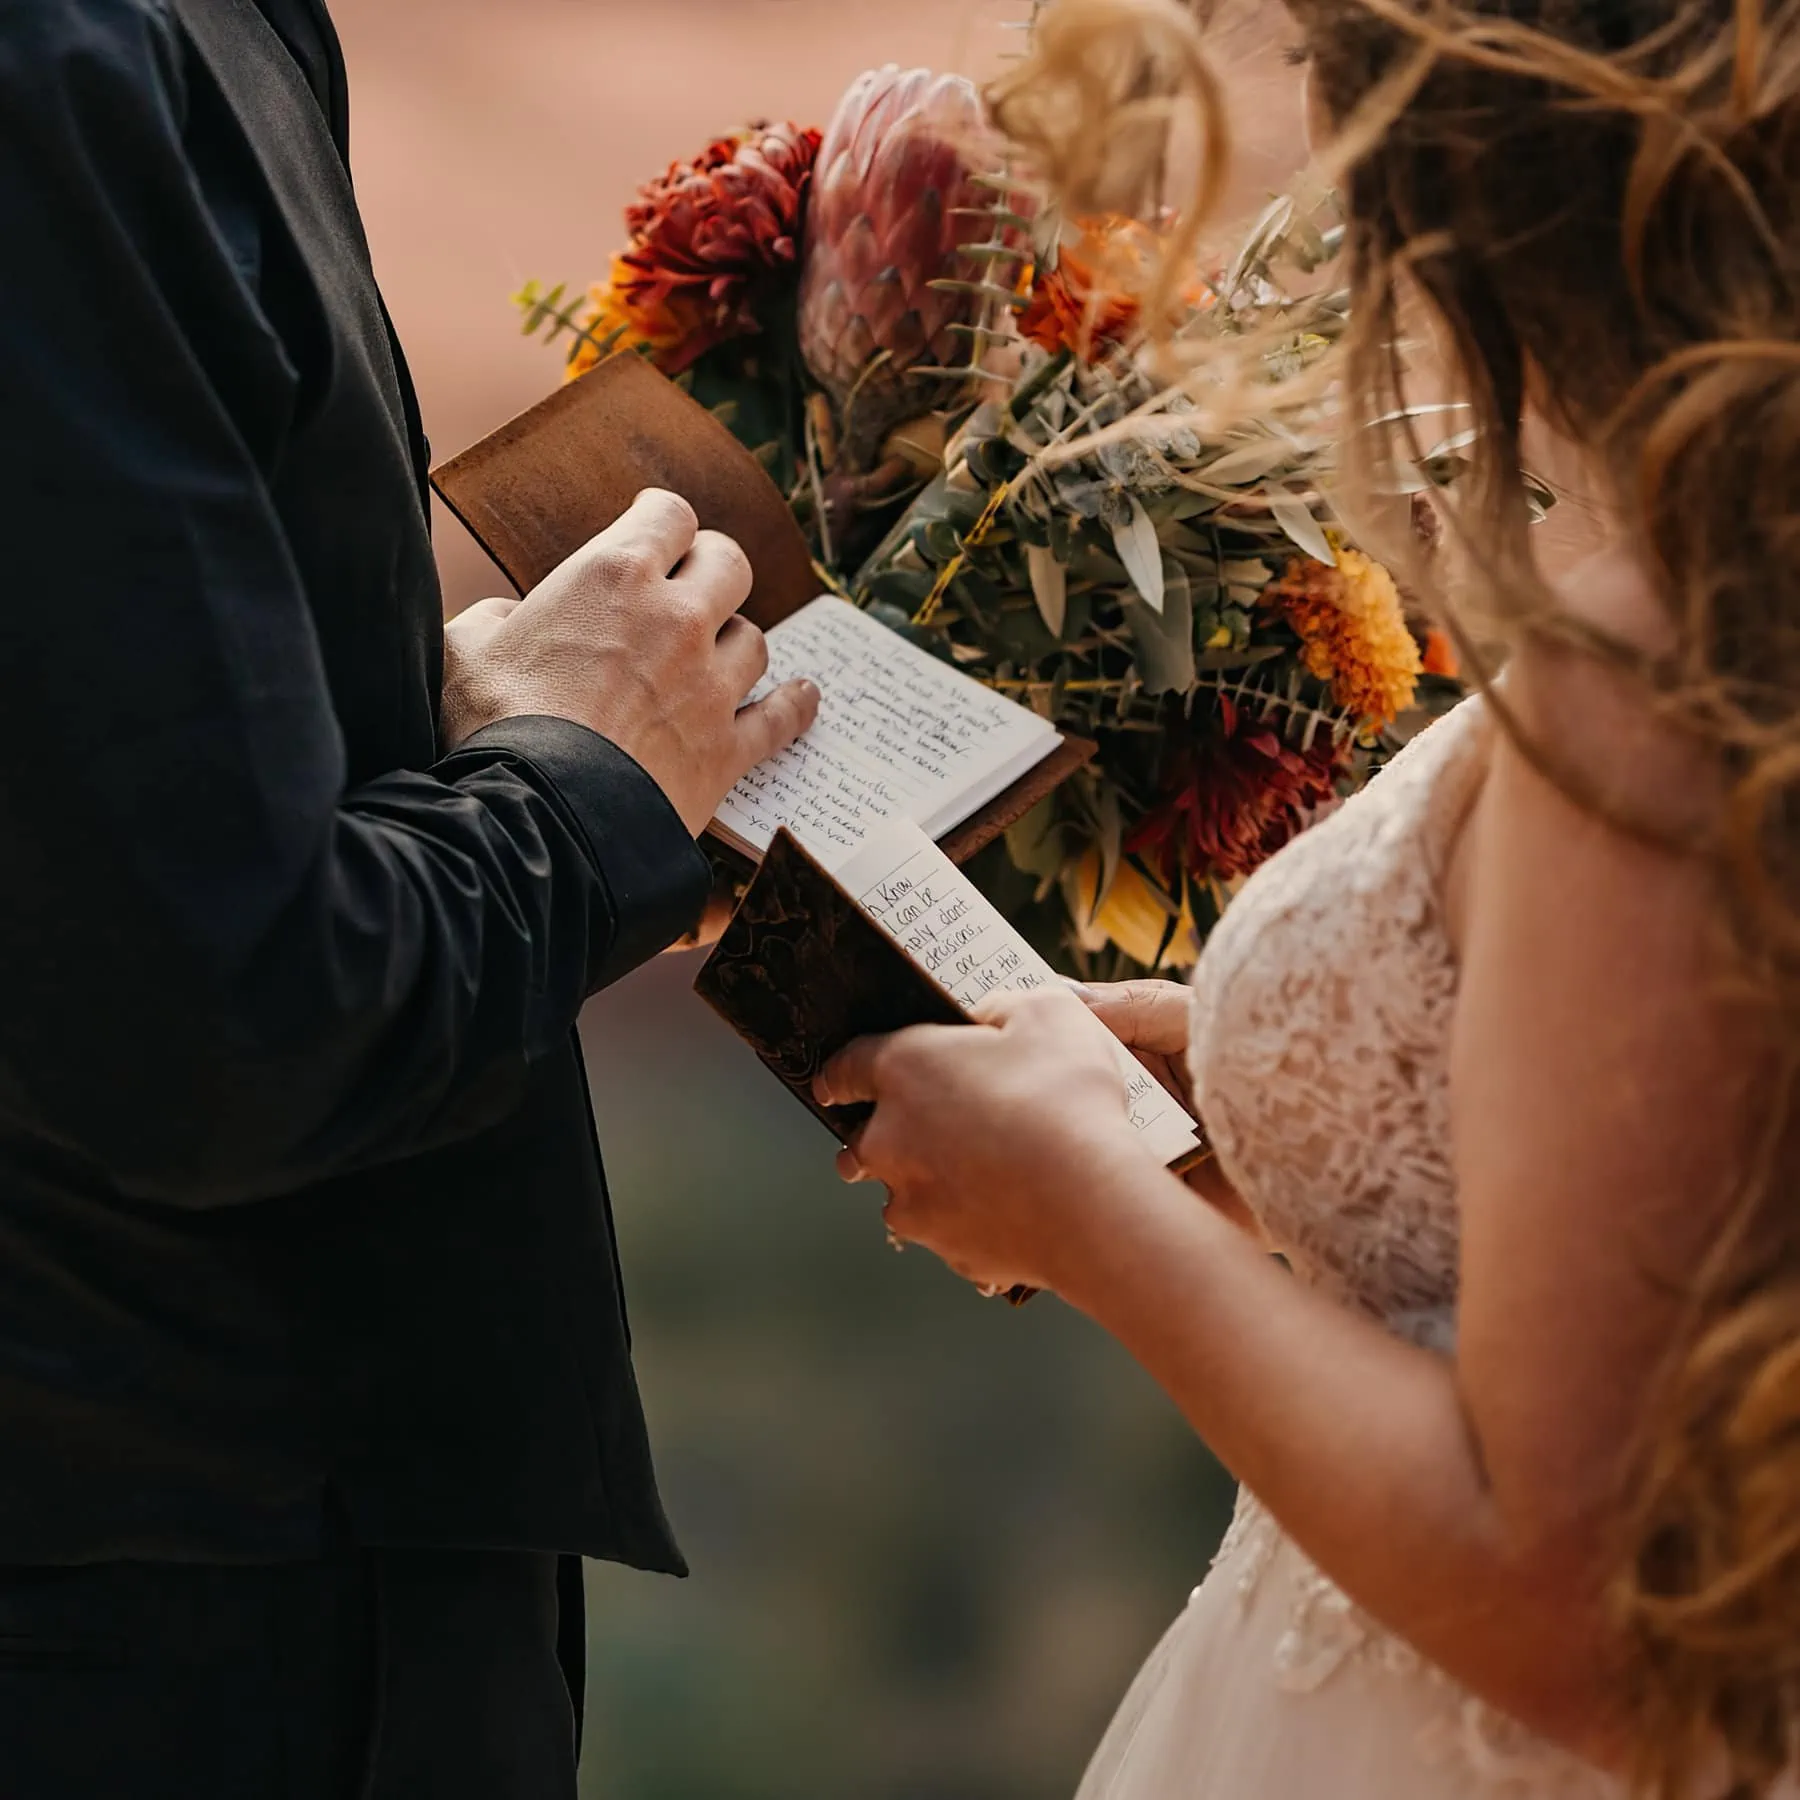 A bride and groom privately share with each other what they wrote in their vow books.